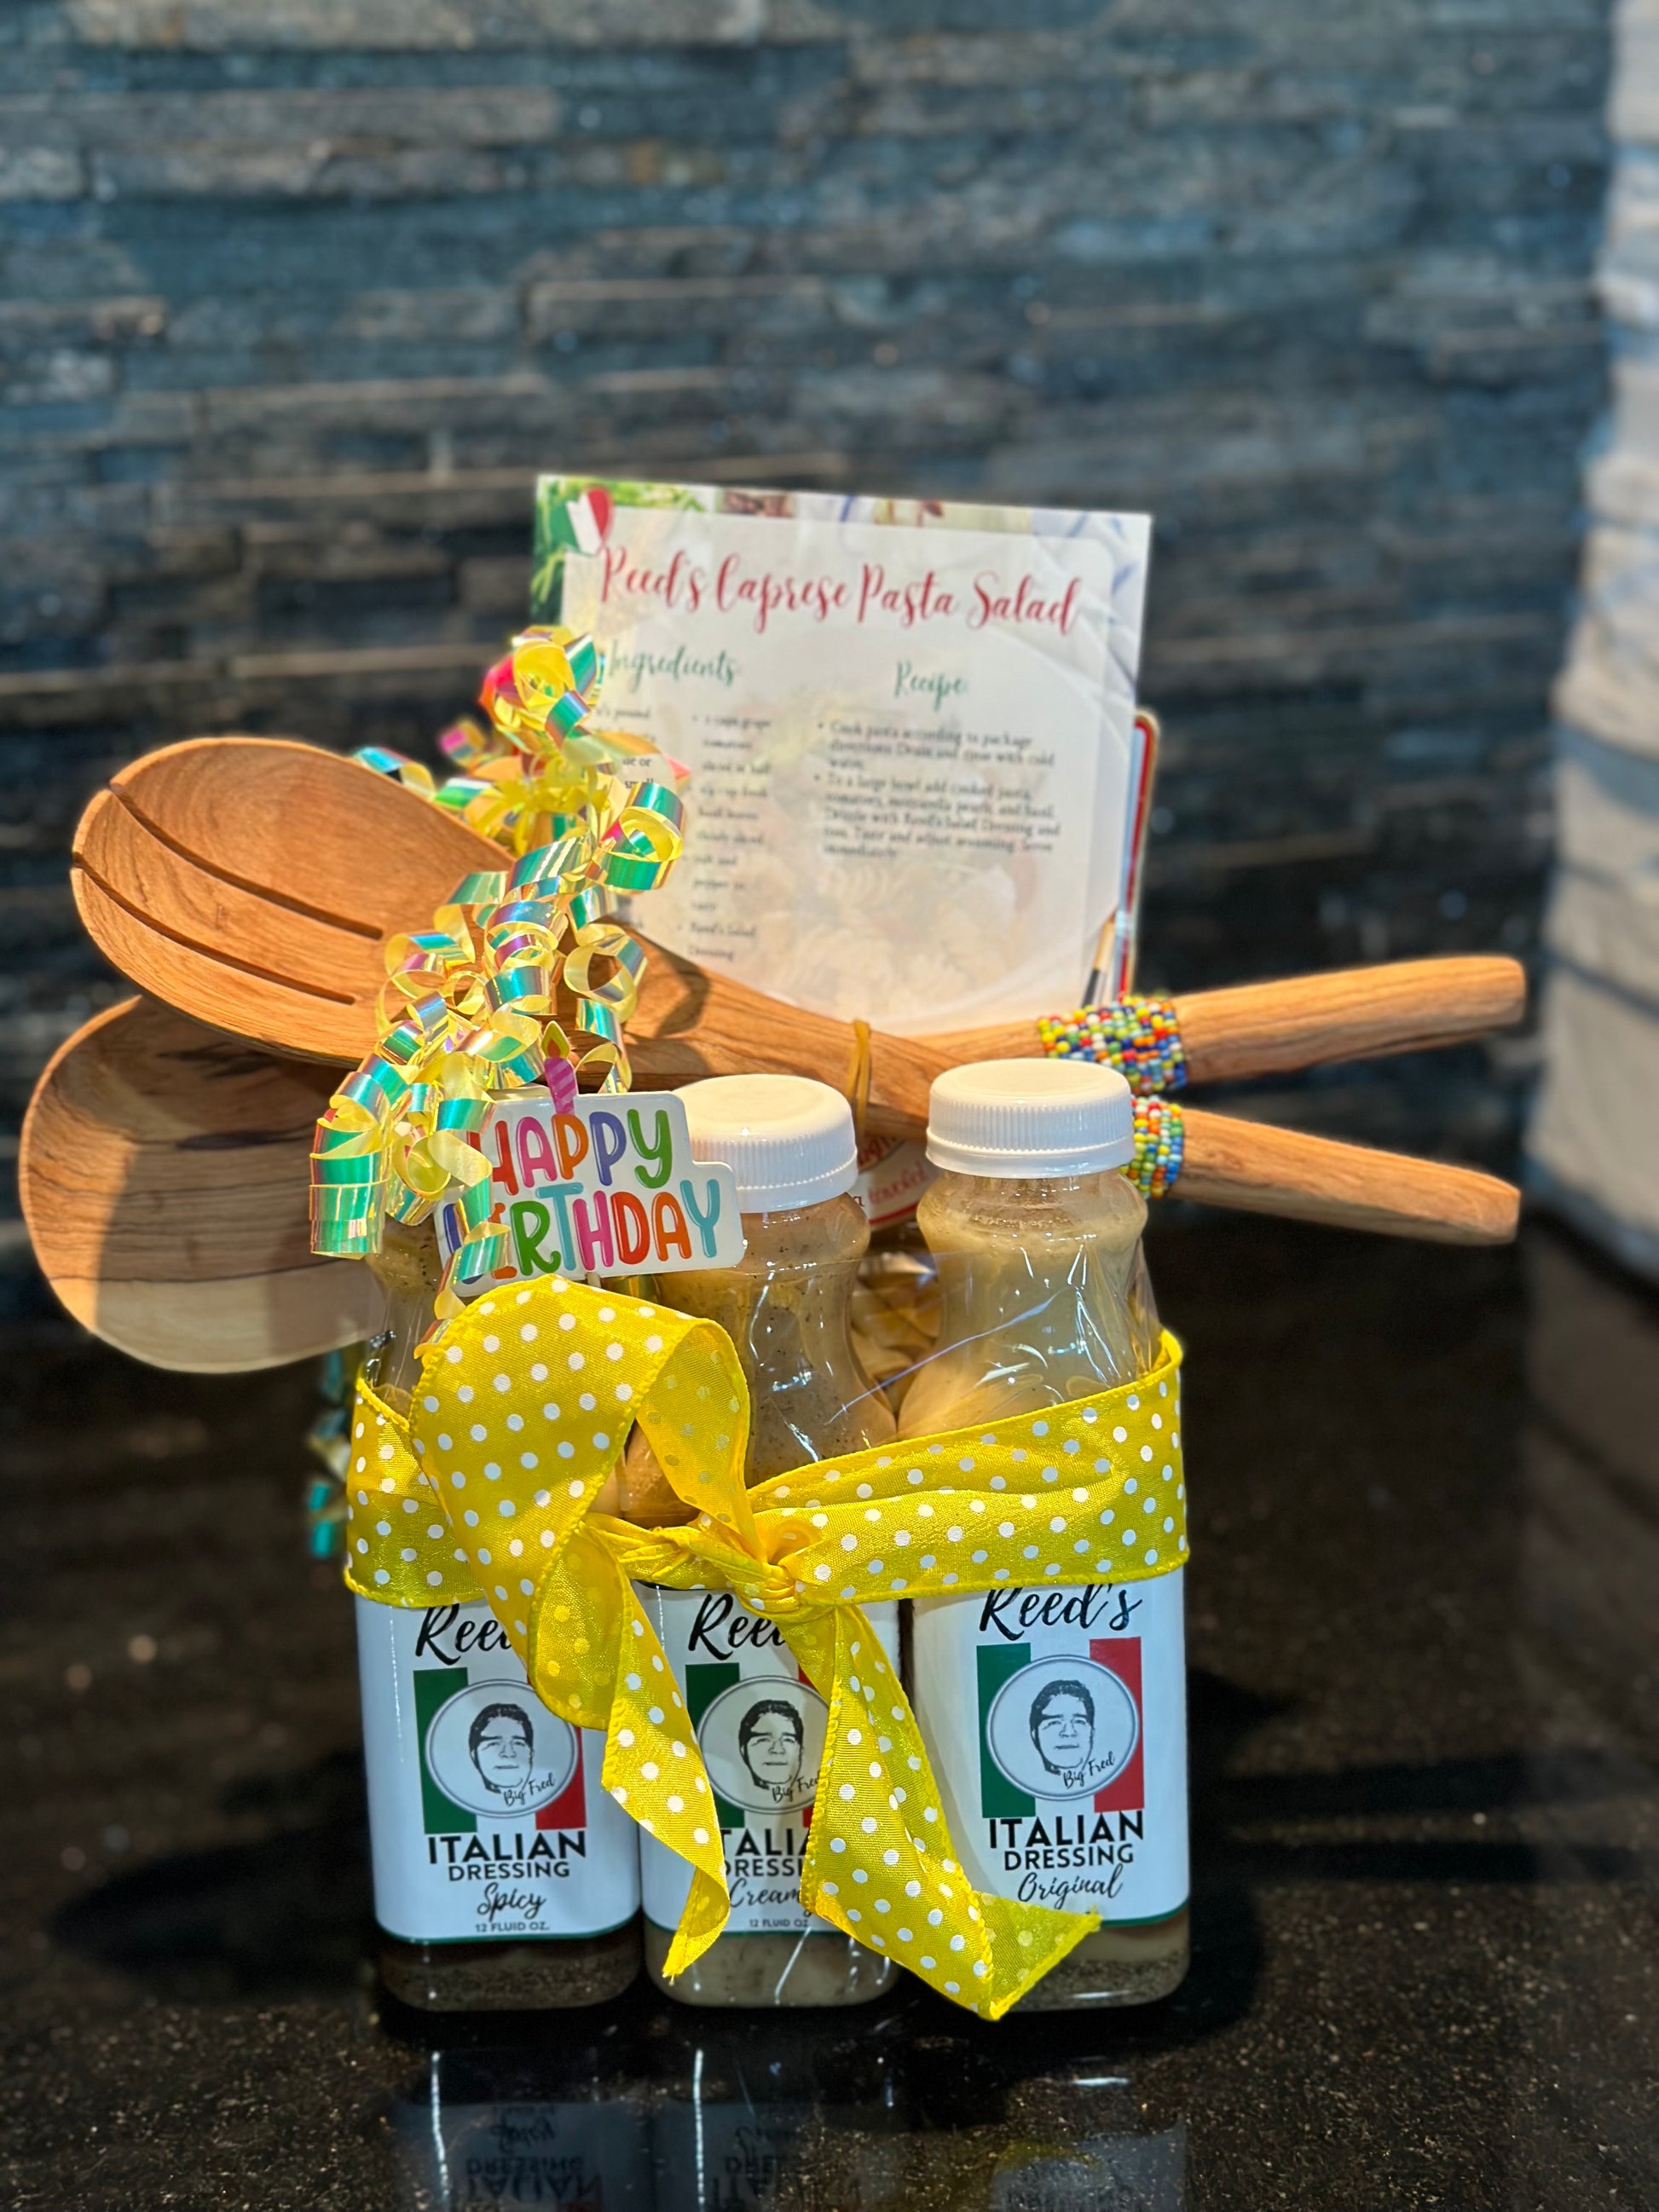 Happy Birthday Gift Bundle with Dressing, Kenyan Spoons, and Pasta